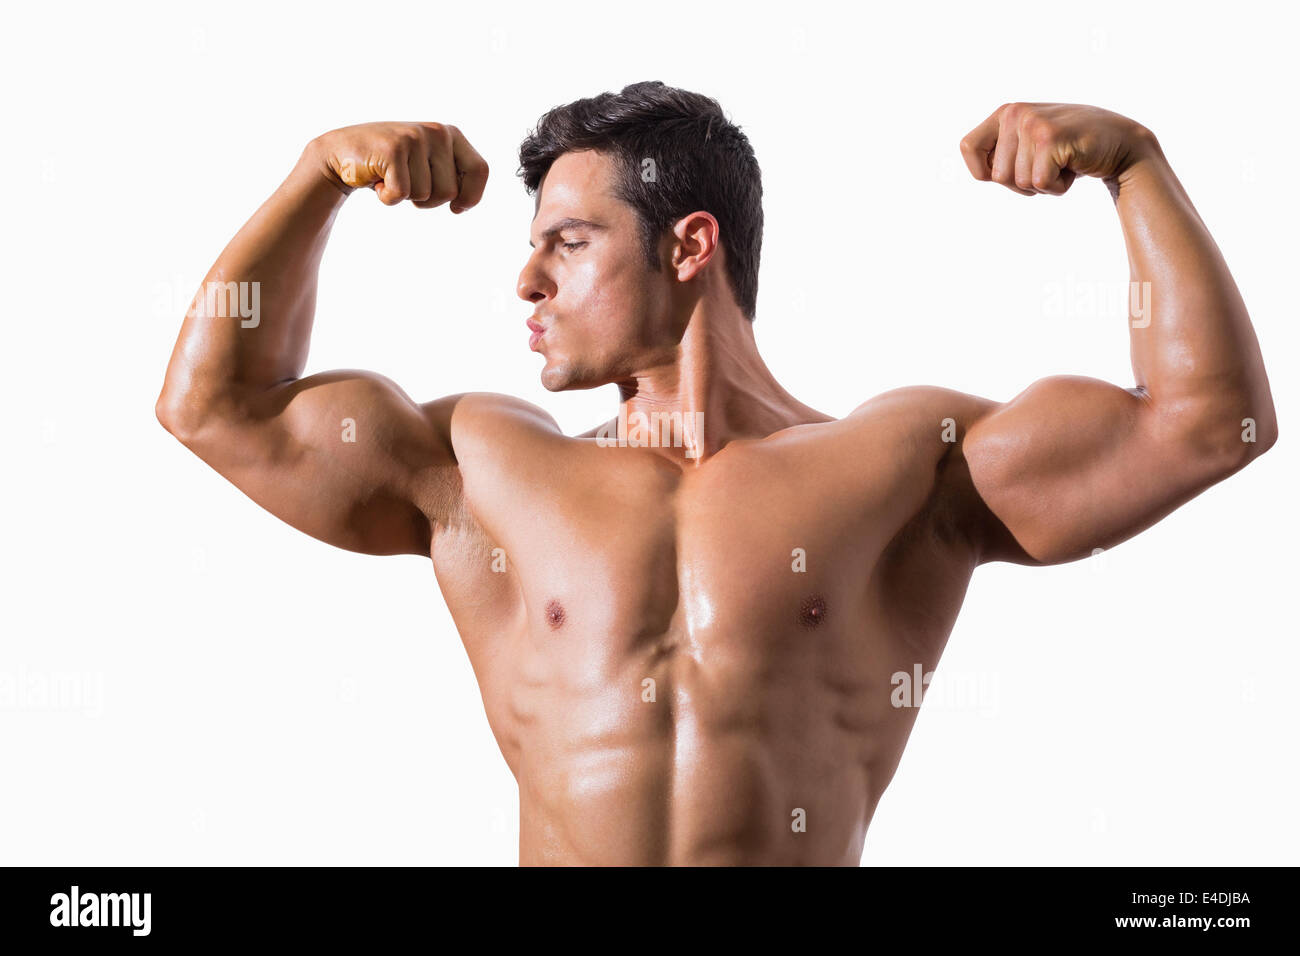 Portrait of a muscular young man flexing muscles Stock Photo